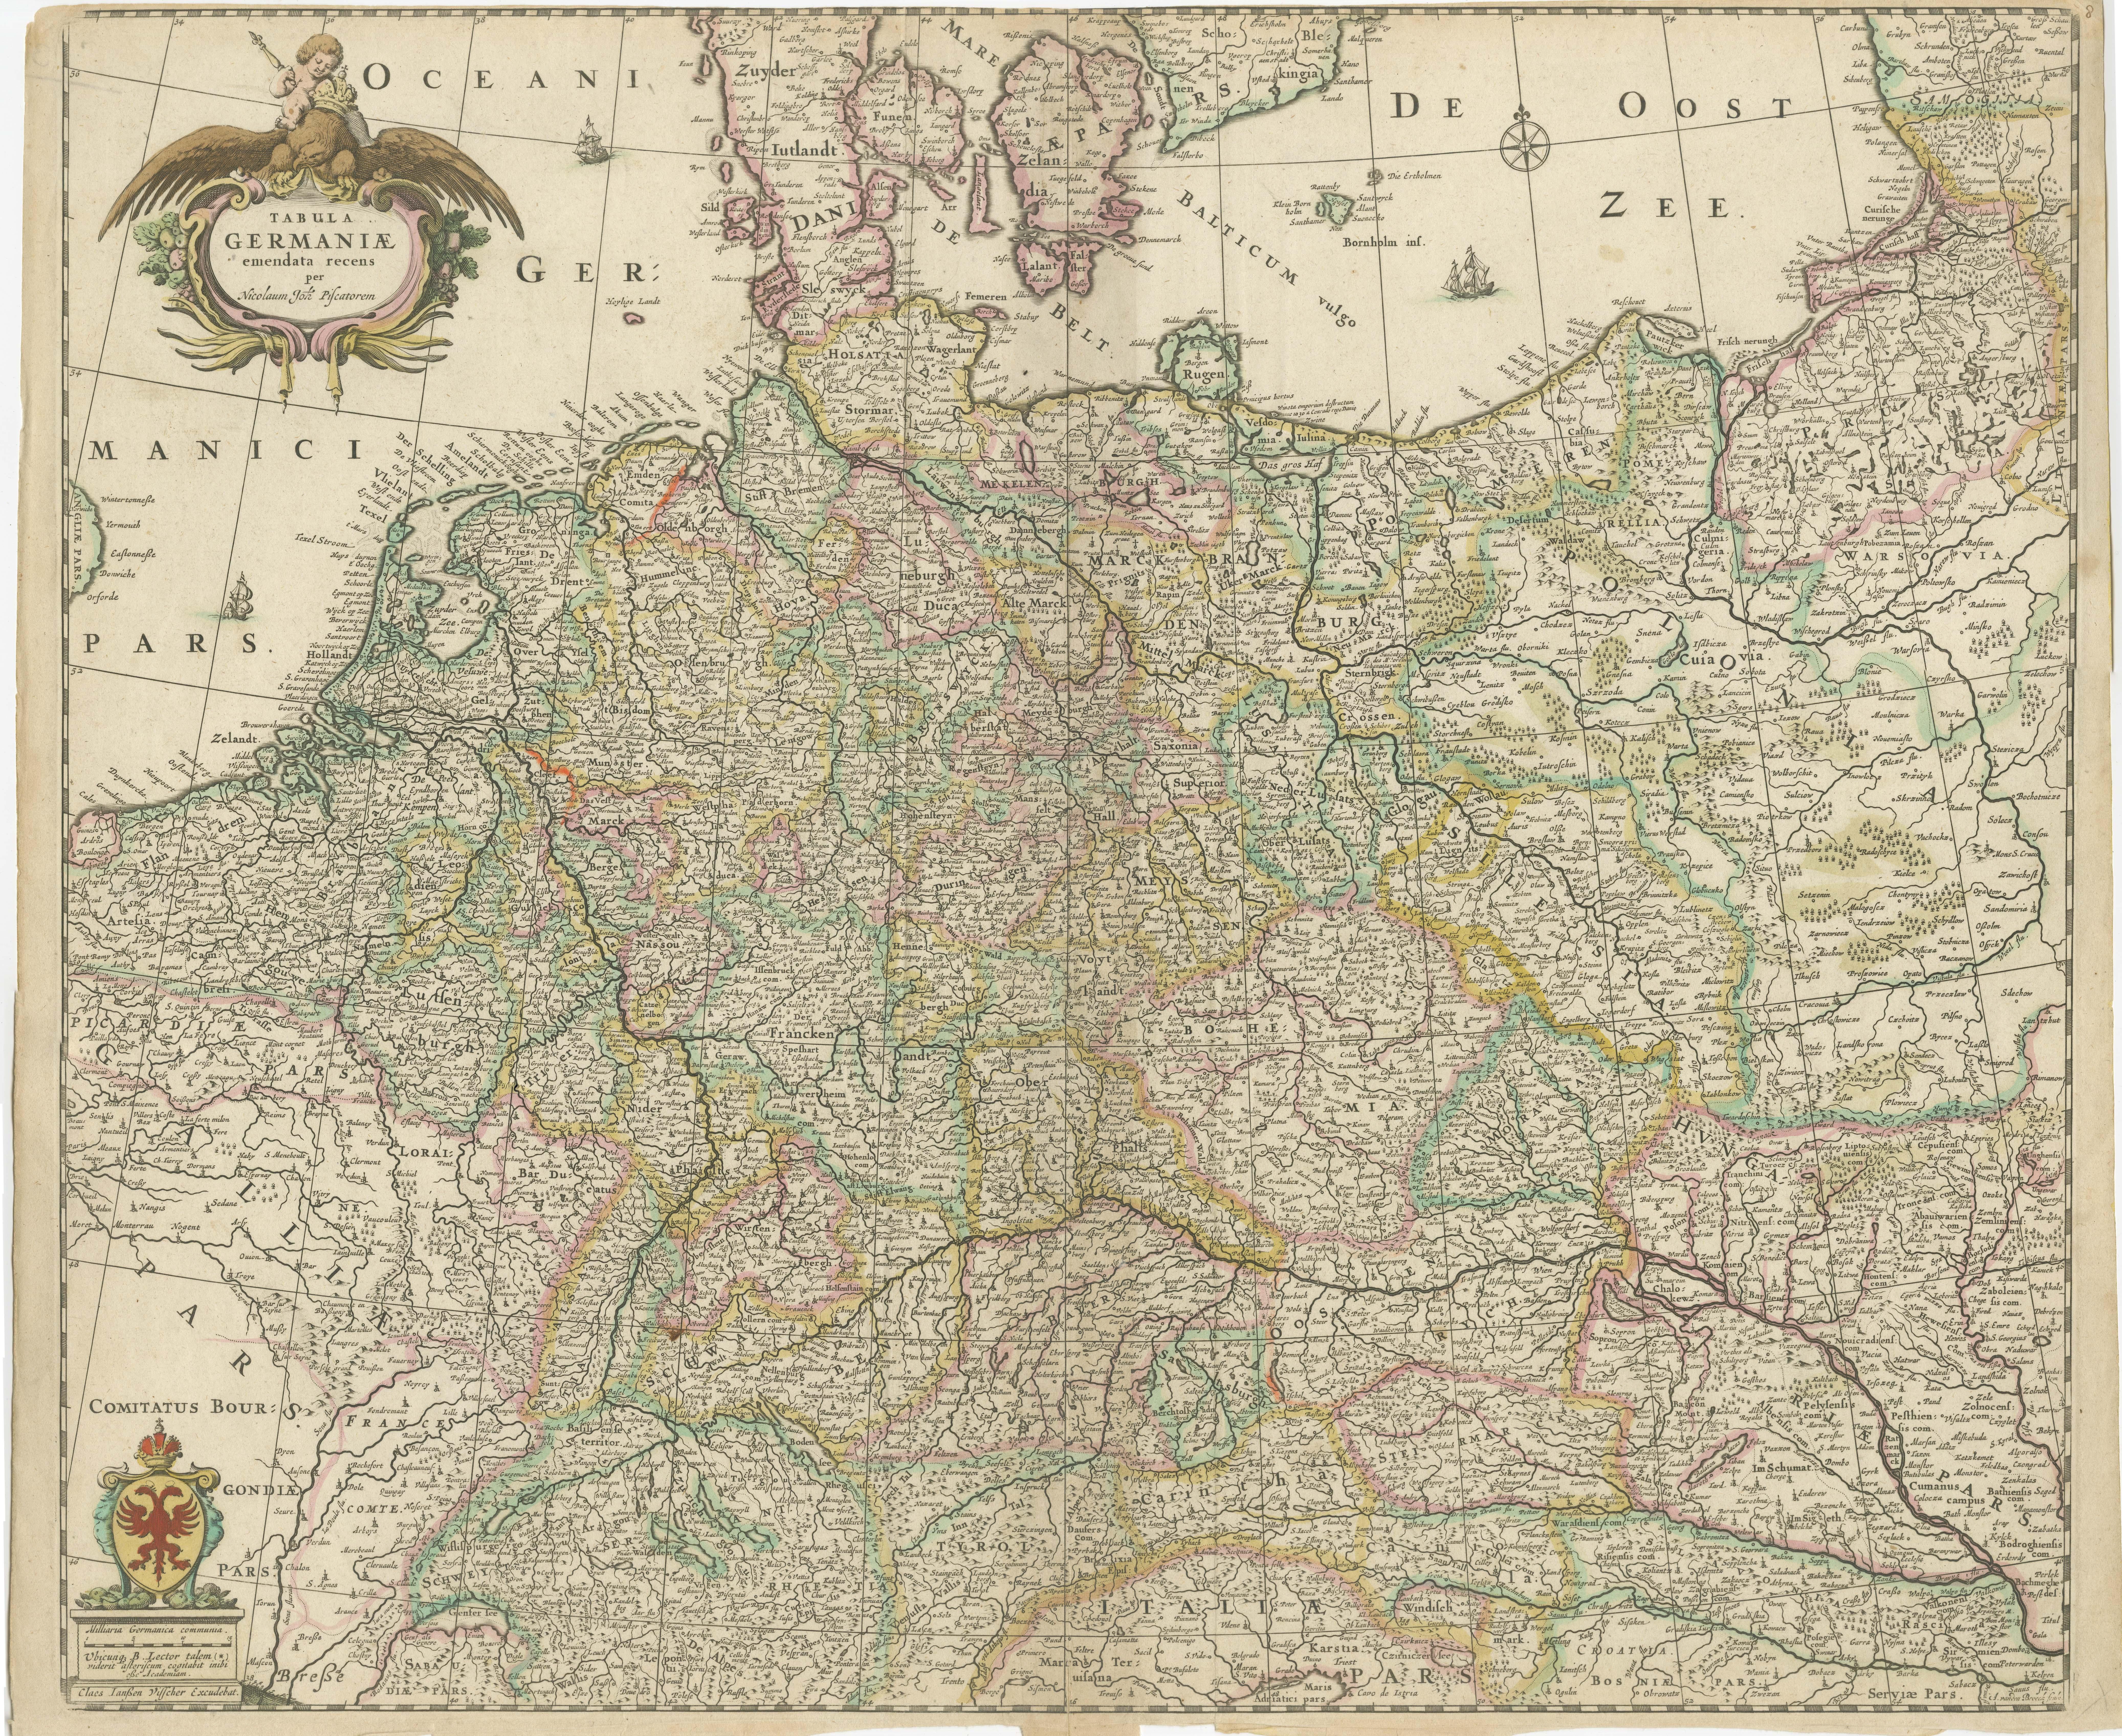 Antique map titled 'Tabula Germaniae'. Orginal antique map of Germany by Claes Jansz. Visscher. Published circa 1650. including the Low Countries, Switzerland, and parts of France, Austria, Bohemia and Poland.